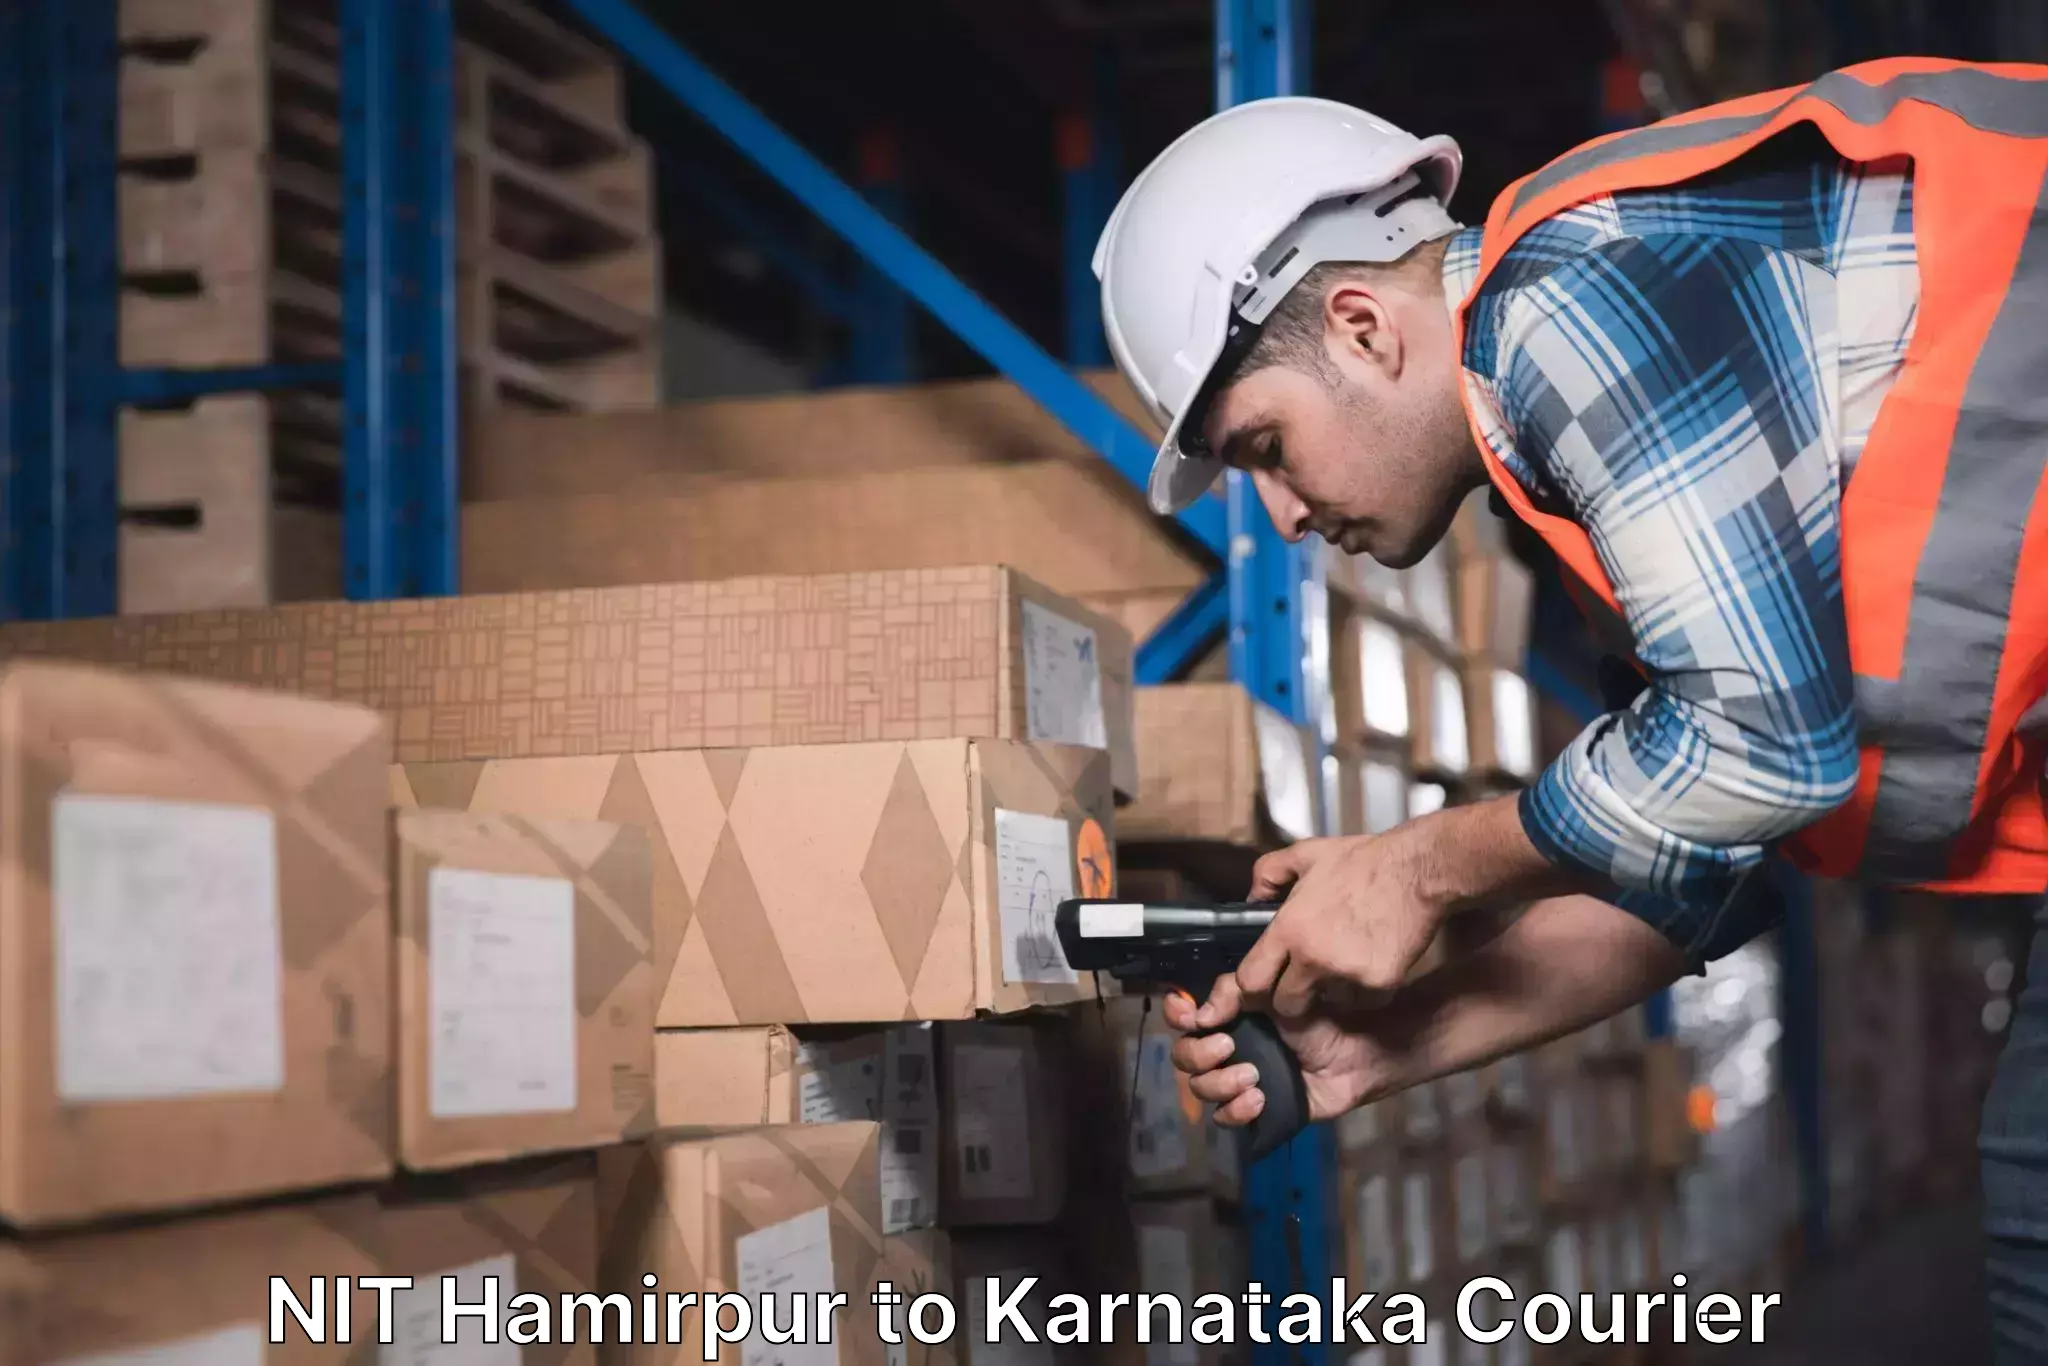 24/7 shipping services NIT Hamirpur to Bangalore